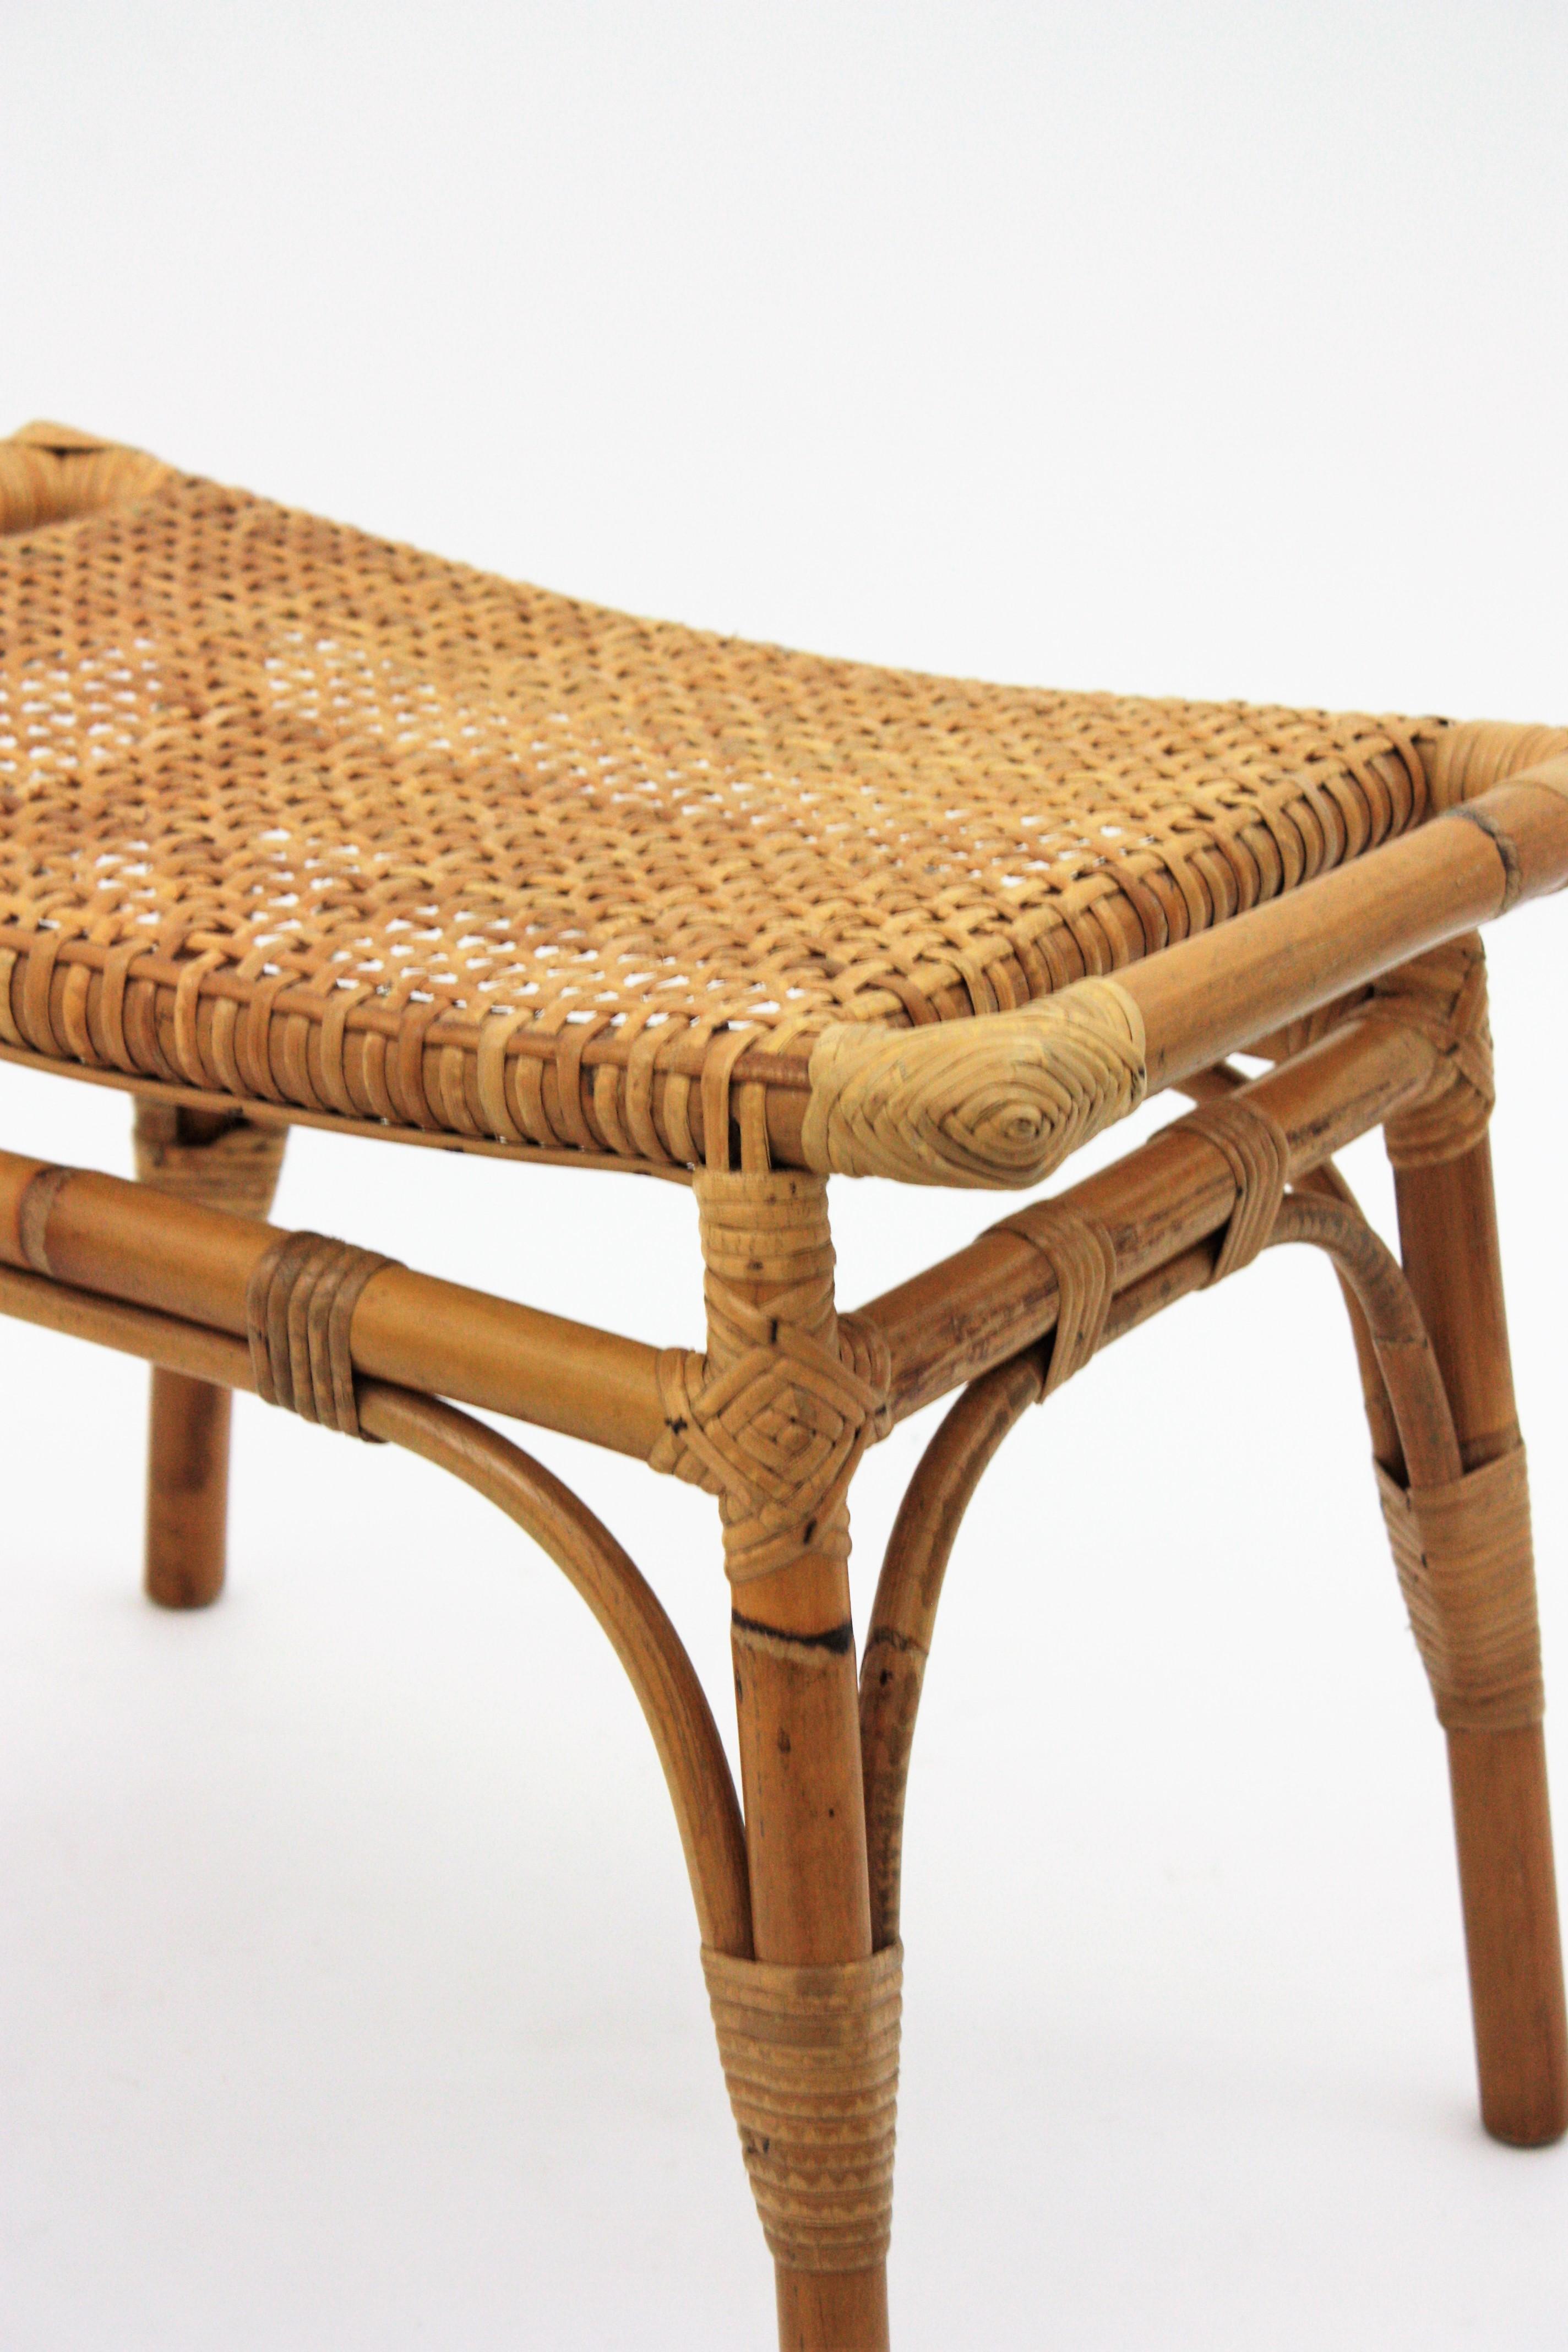 Spanish Pair of Bamboo Stools, Benches or Ottoman with Woven Wicker Cane Seats